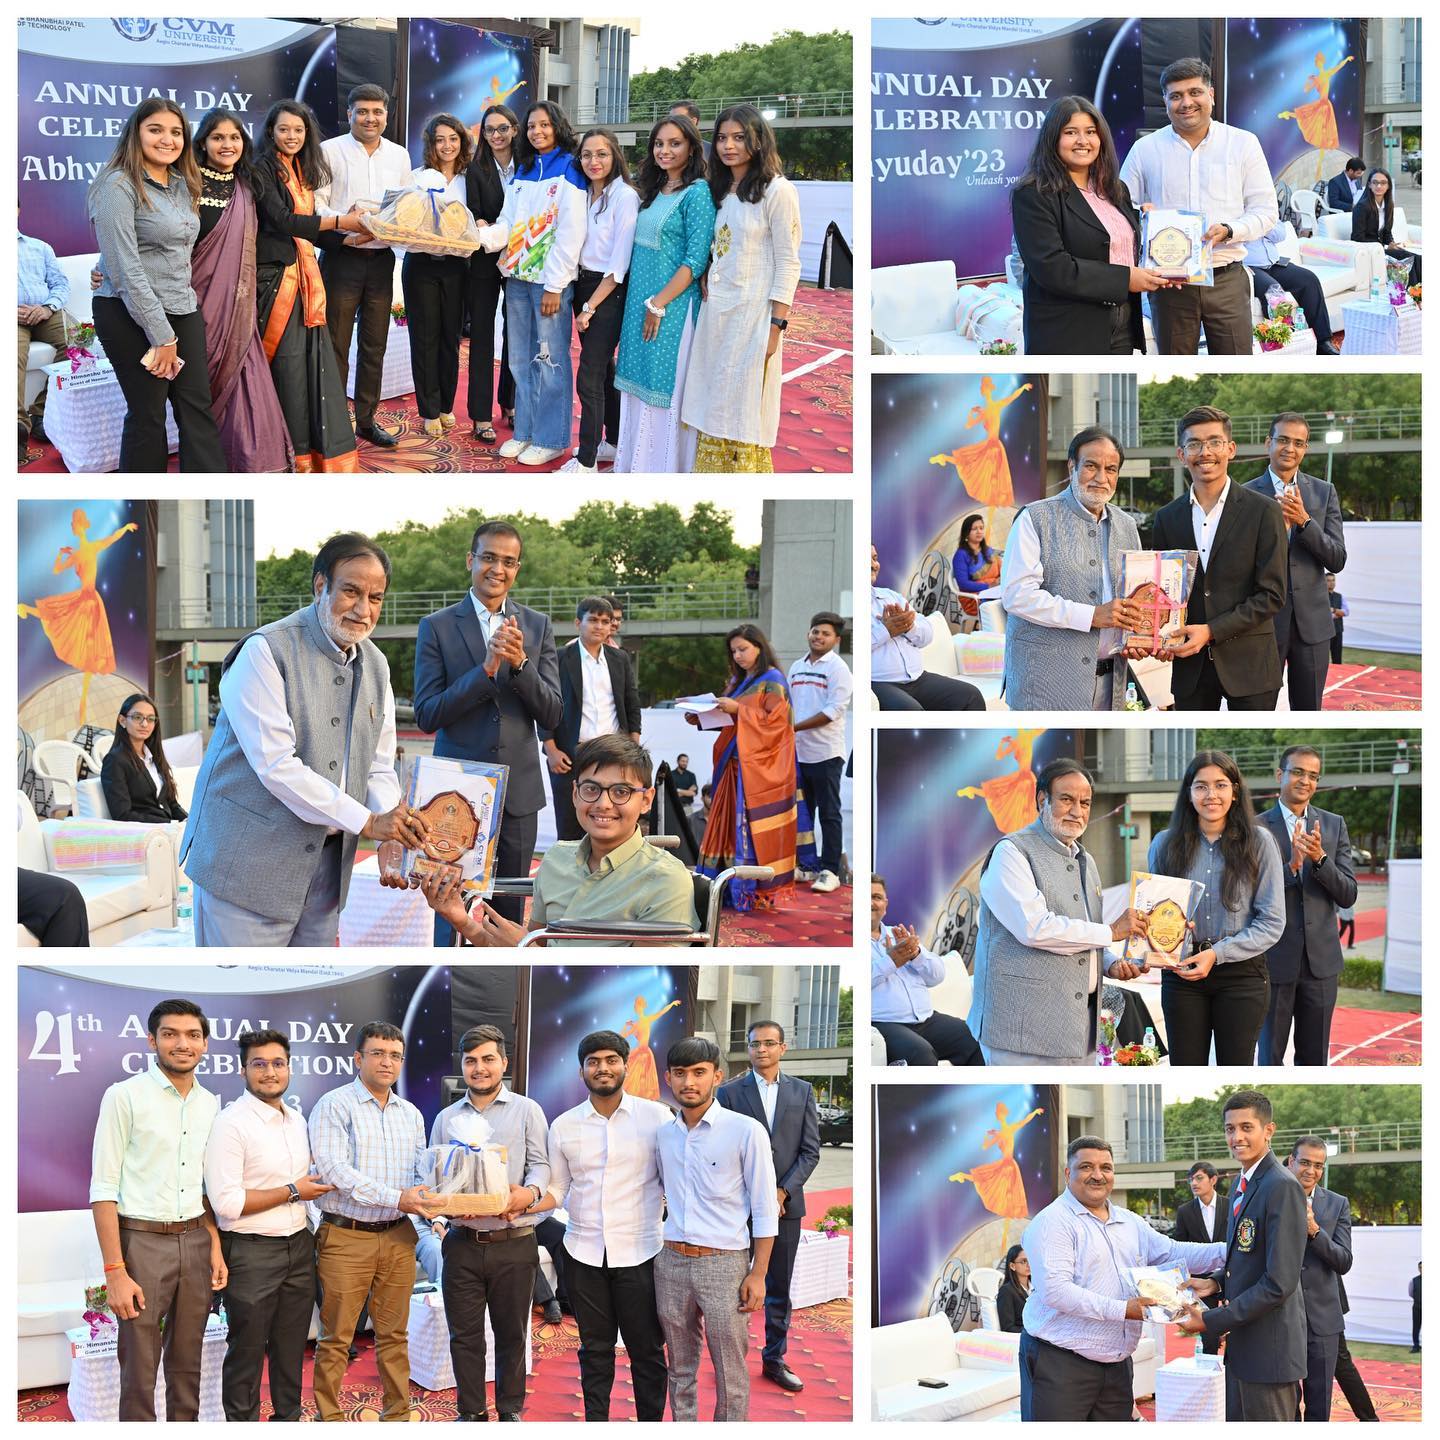 MBIT Celebrated the 14th Annual day on 14th April, 2023 by distributing prizes to the students